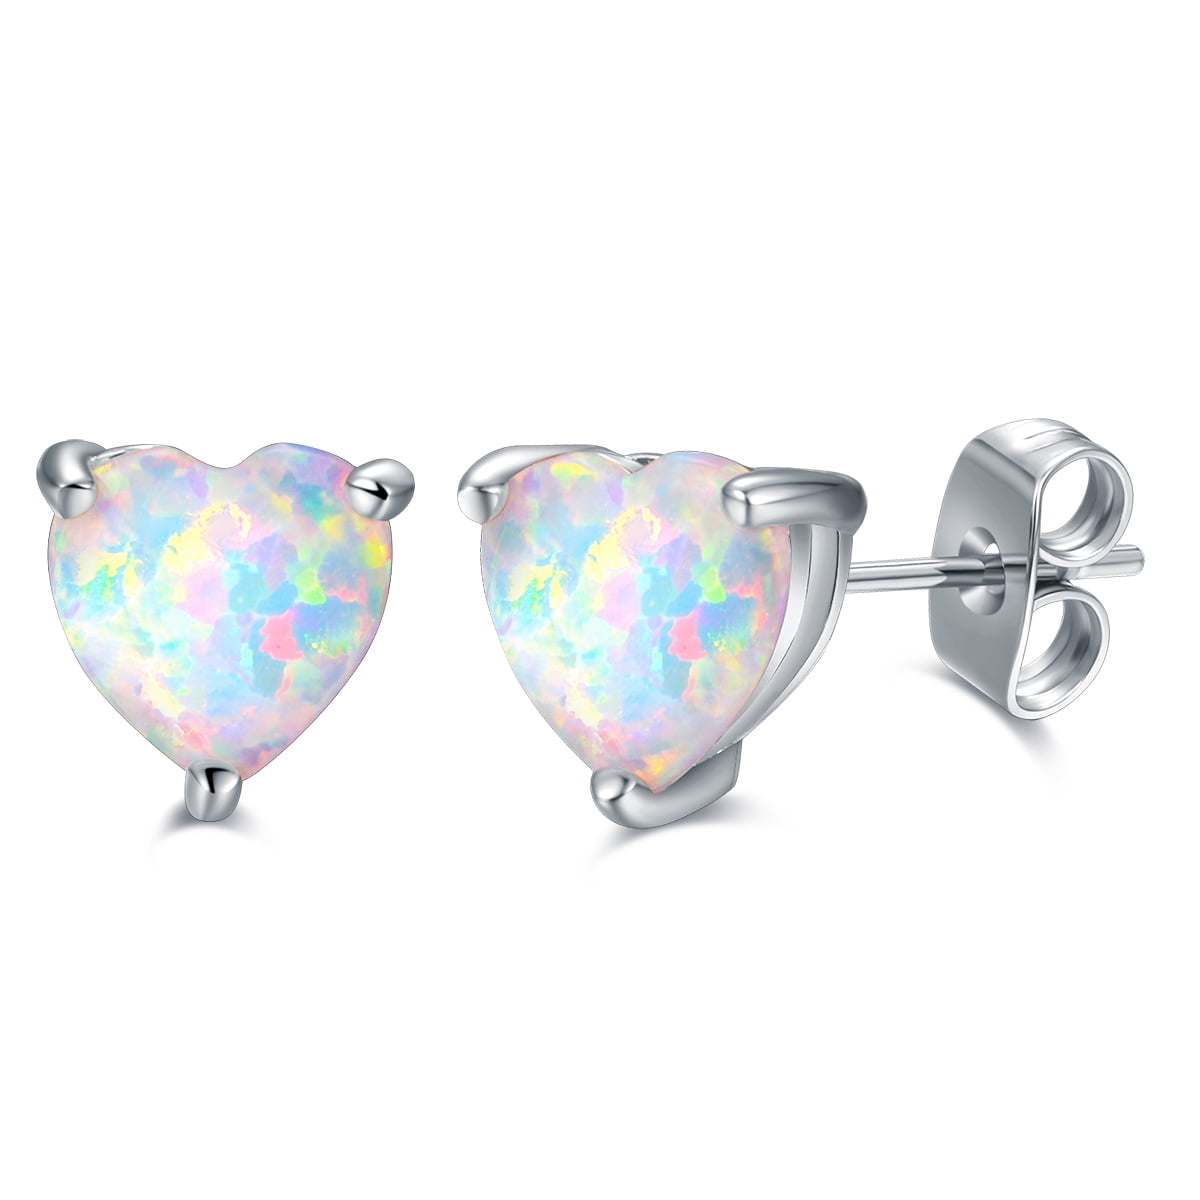 Details about   Fine Gem Stone Opal & Sapphire 925 Sterling Silver 4 Piece Button set Jewelry 